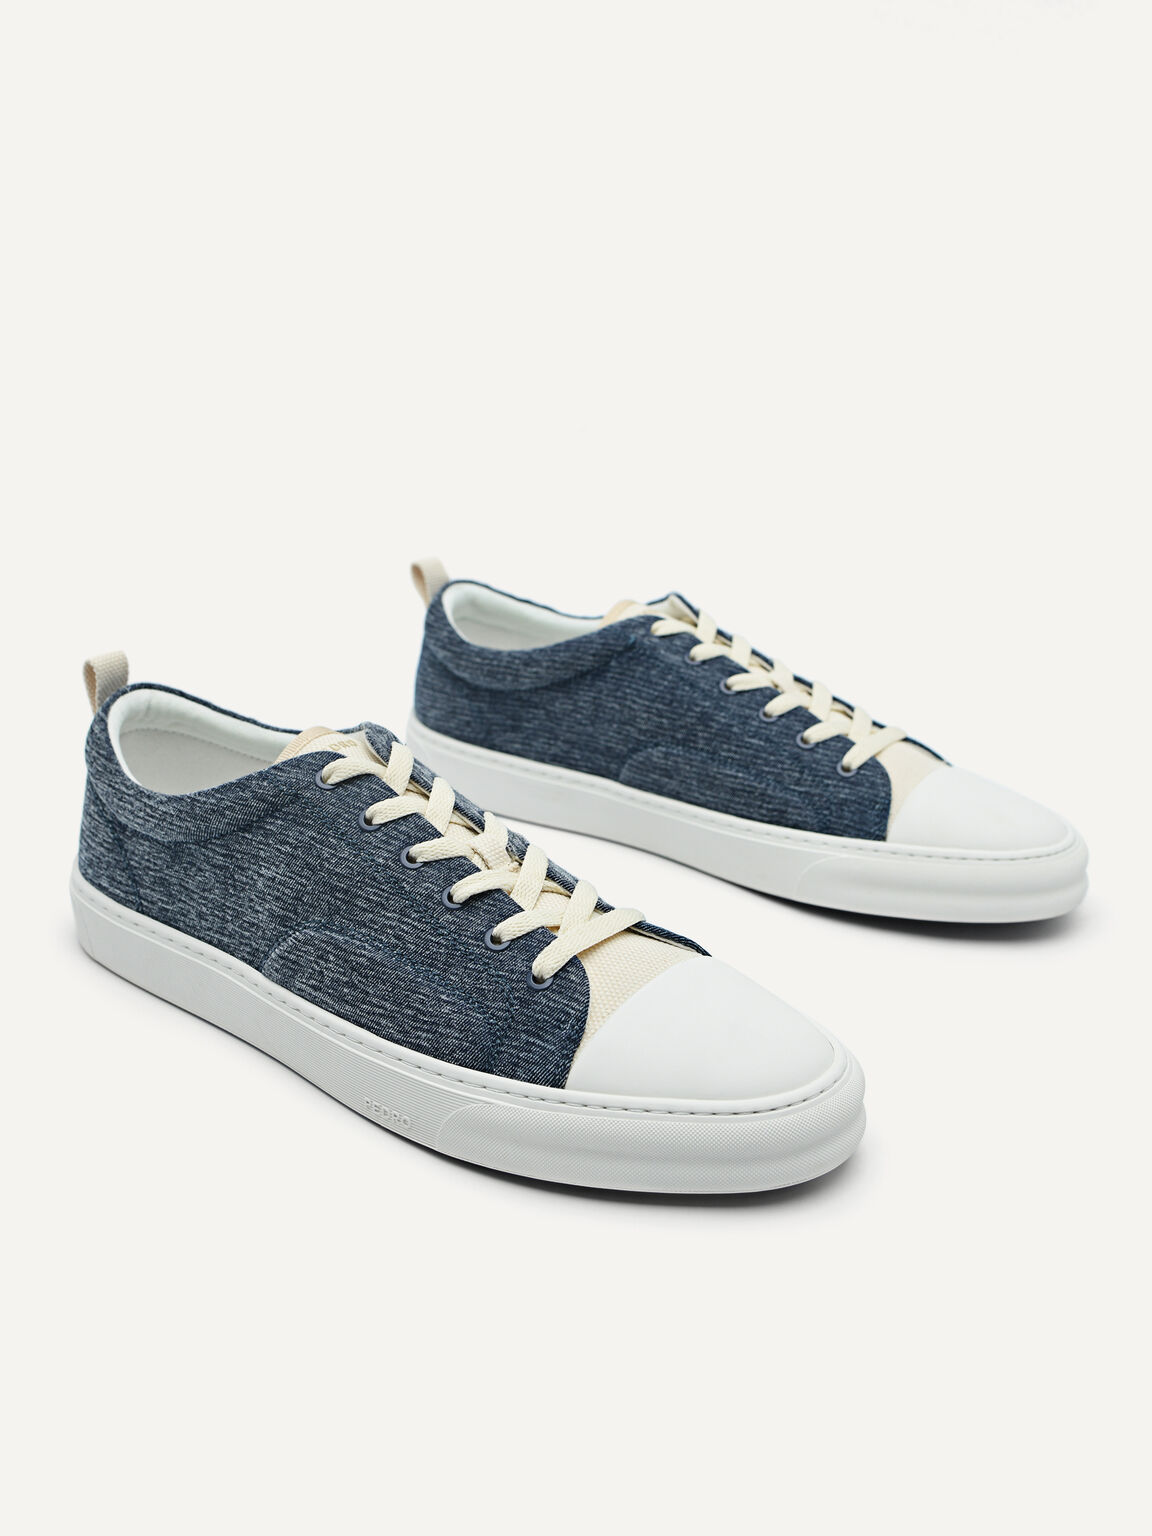 Lace-Up Sneakers, Navy